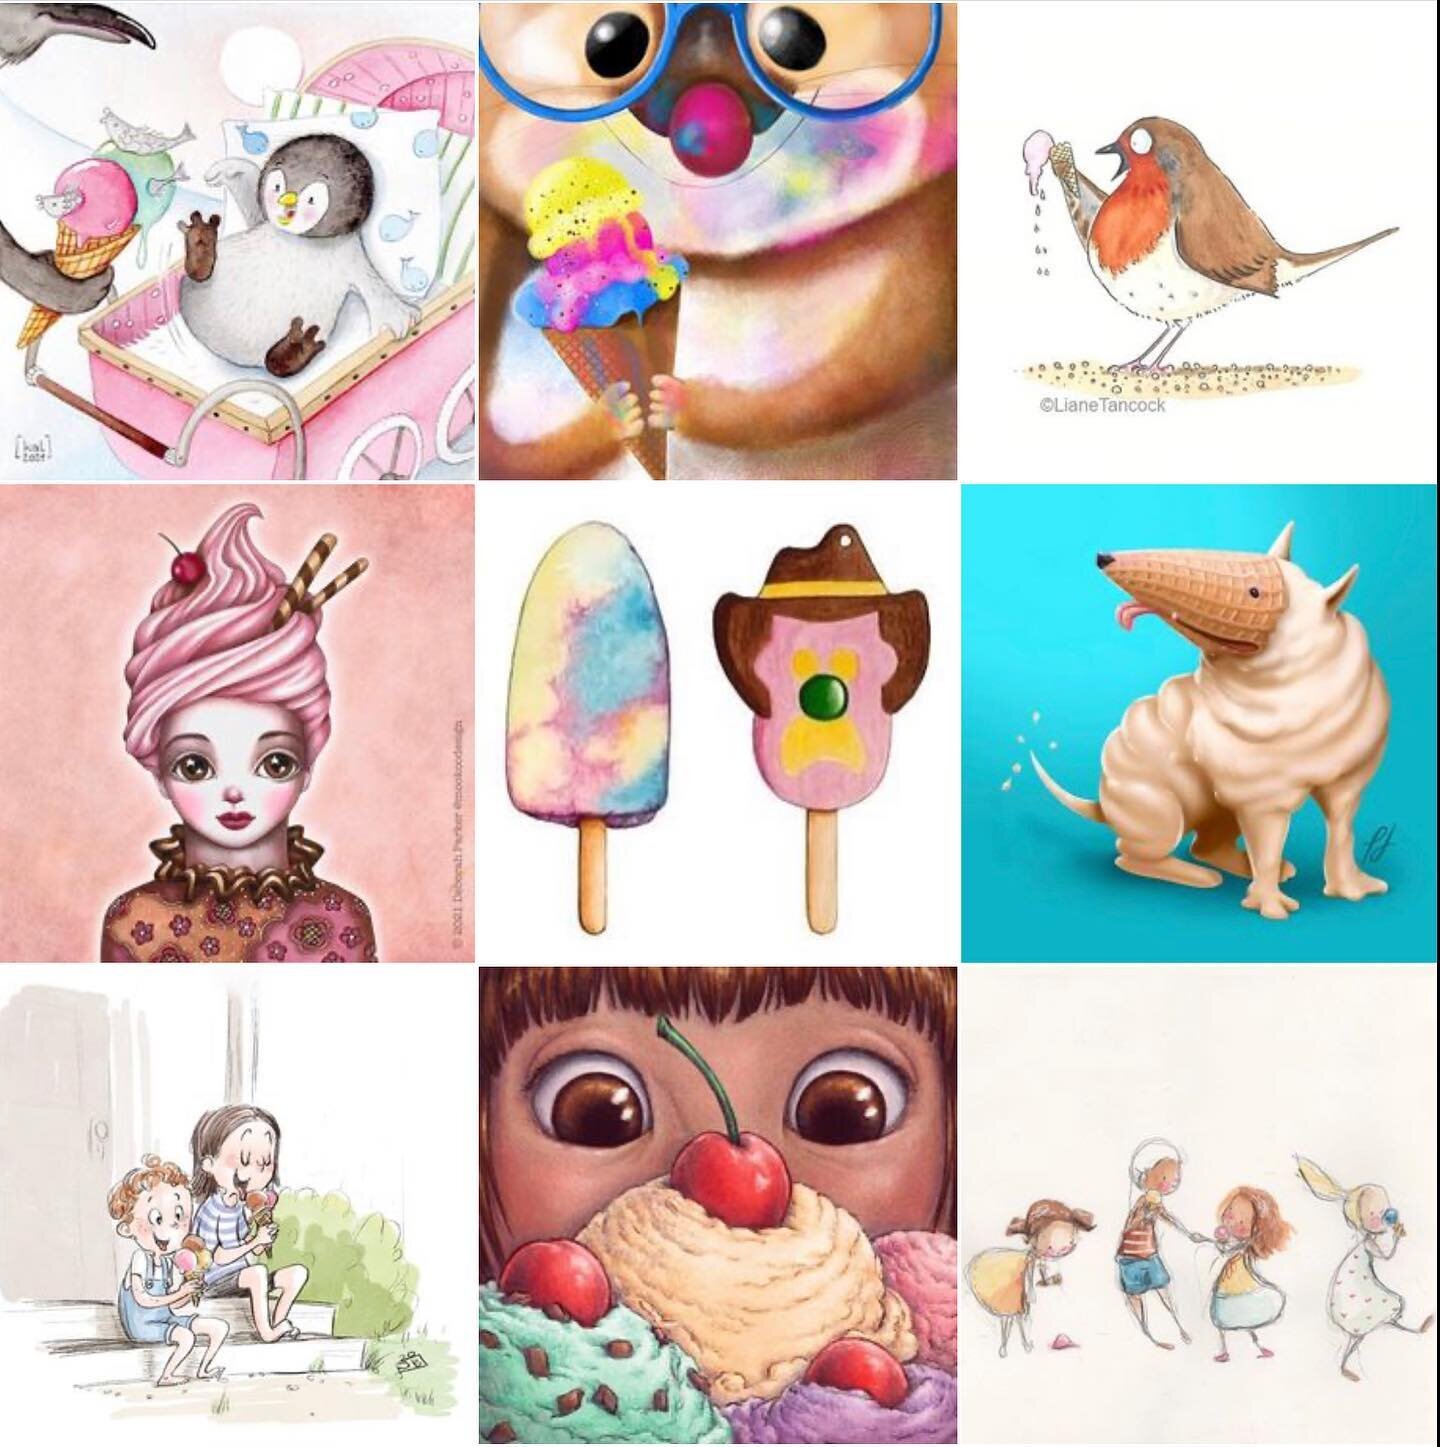 Can you guess which theme we&rsquo;re featuring on @theillustrationstation this week?? Loving these illustrations! 
.
.
.
.
.
.
.
.
.
.
.
.
.
.
#illustratorsofinstagram #childrensbookillustration #illustrationforkids #icecreamlover #icecreamlove #ill